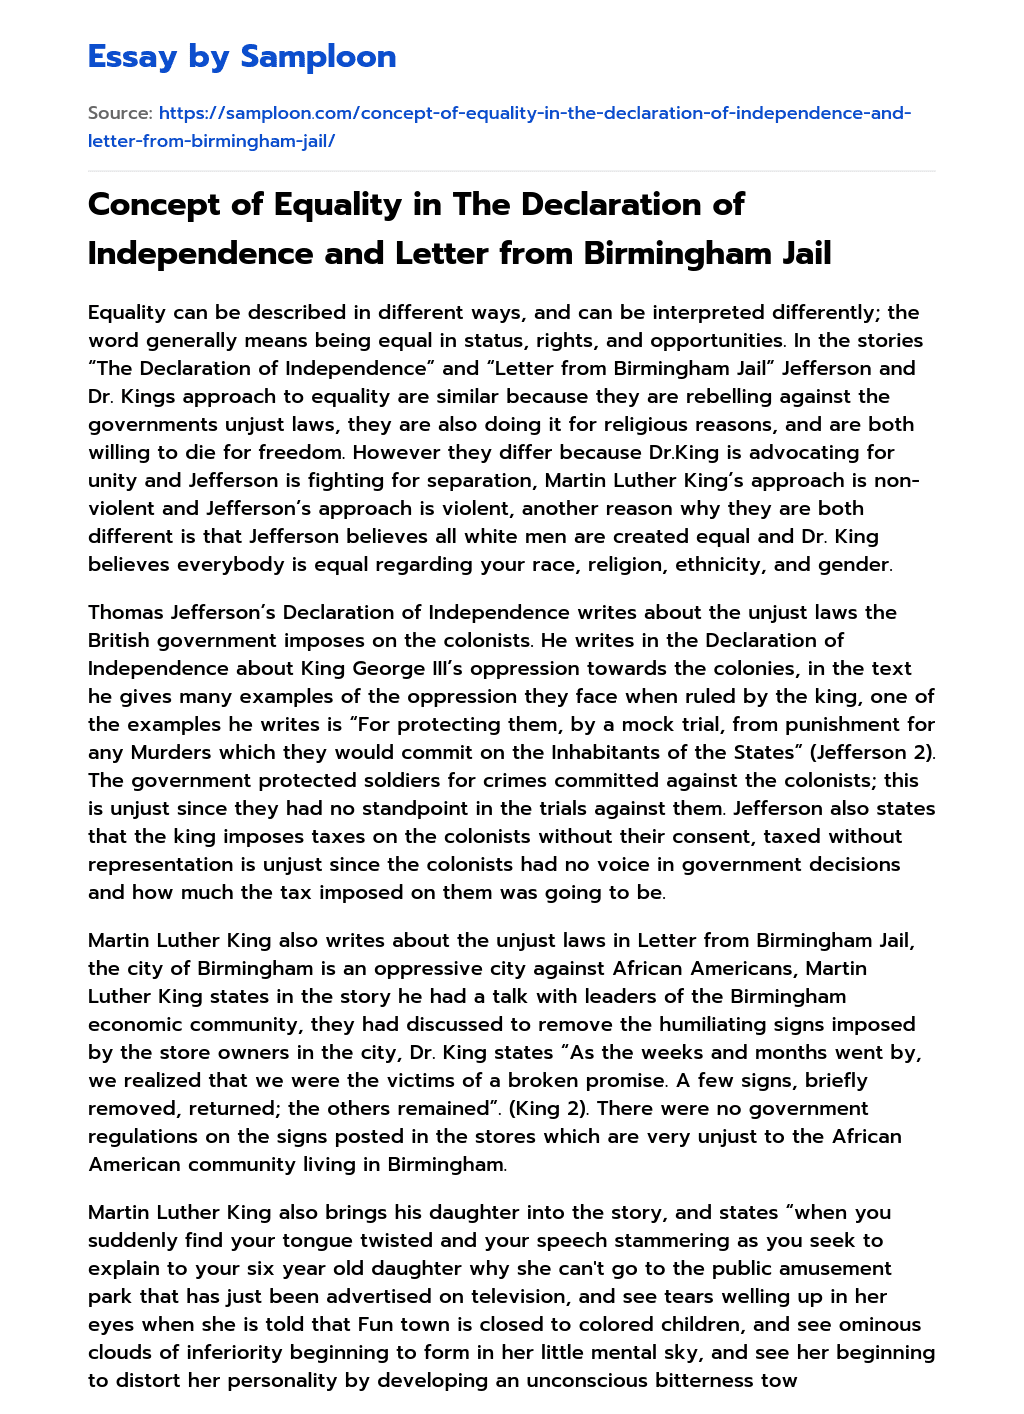 Concept of Equality in The Declaration of Independence and Letter from Birmingham Jail essay